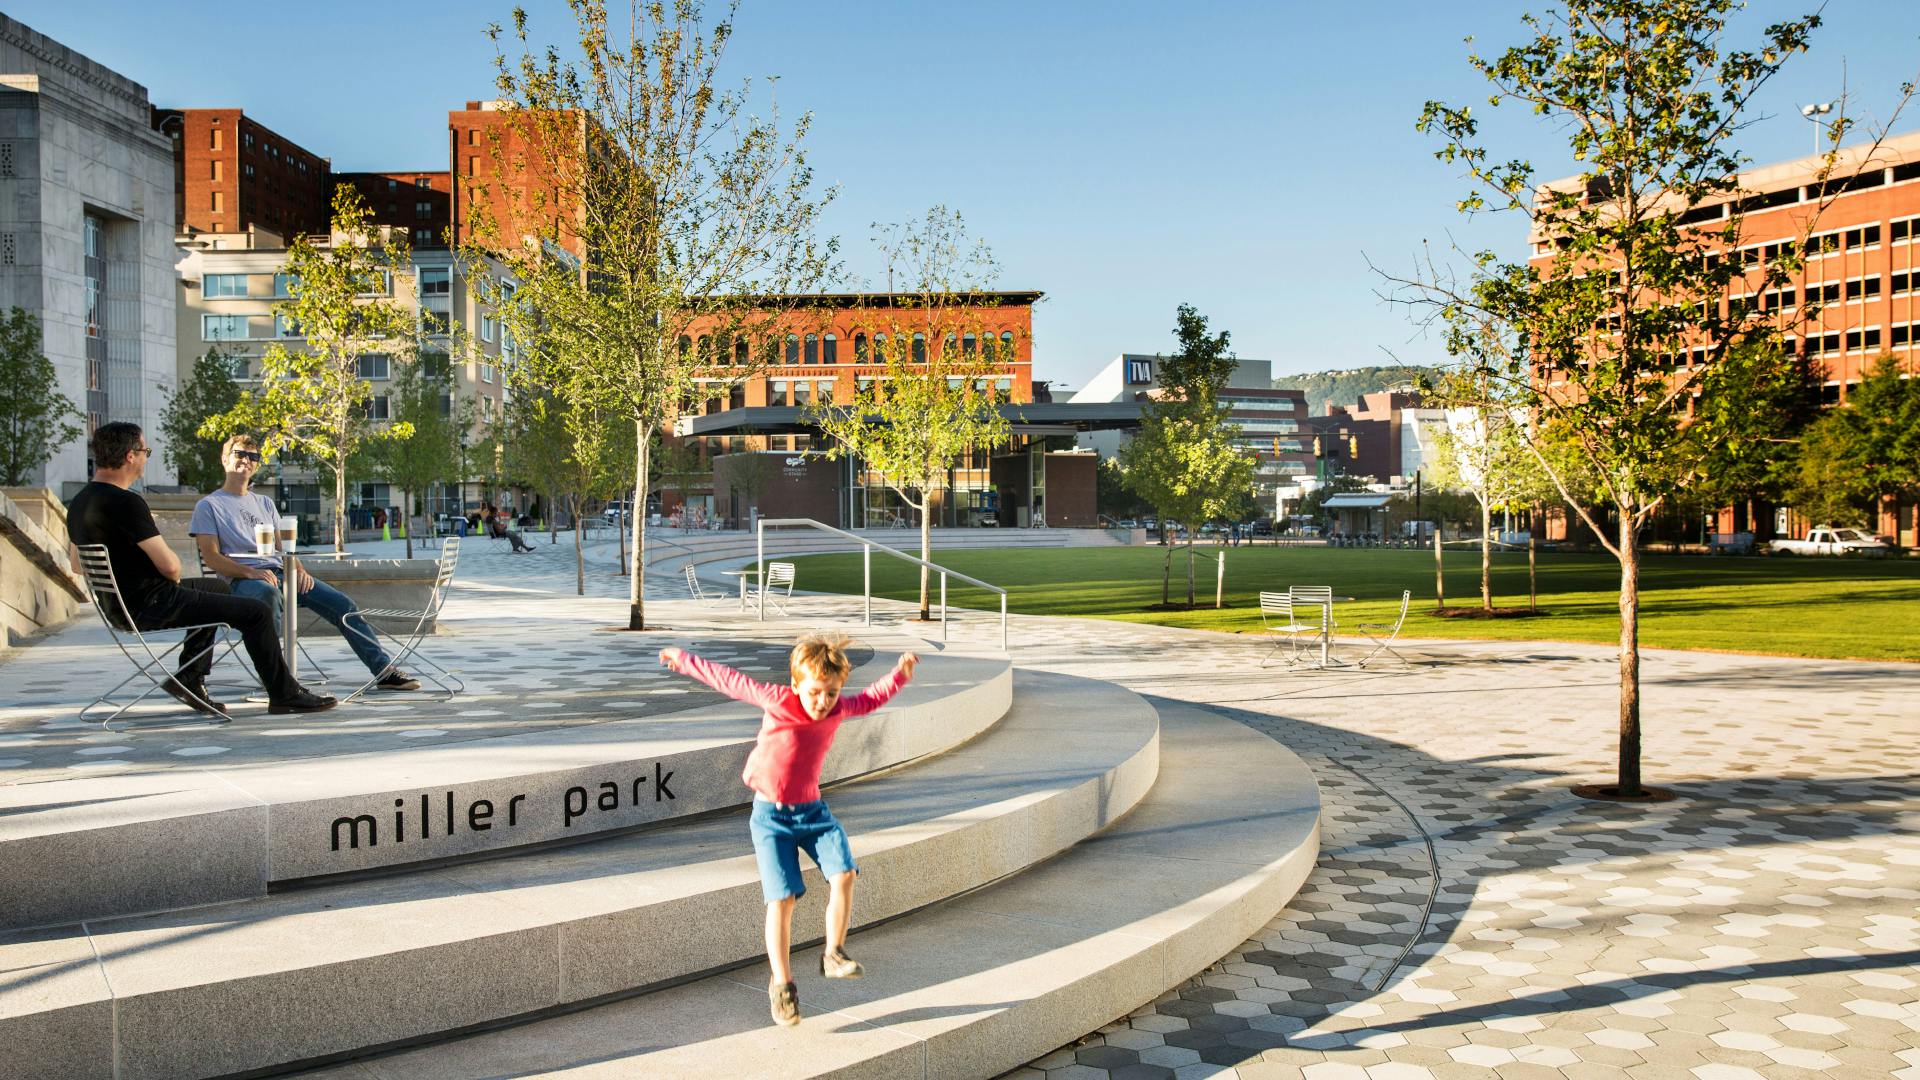 A civic park in the heart of a growing innovation district